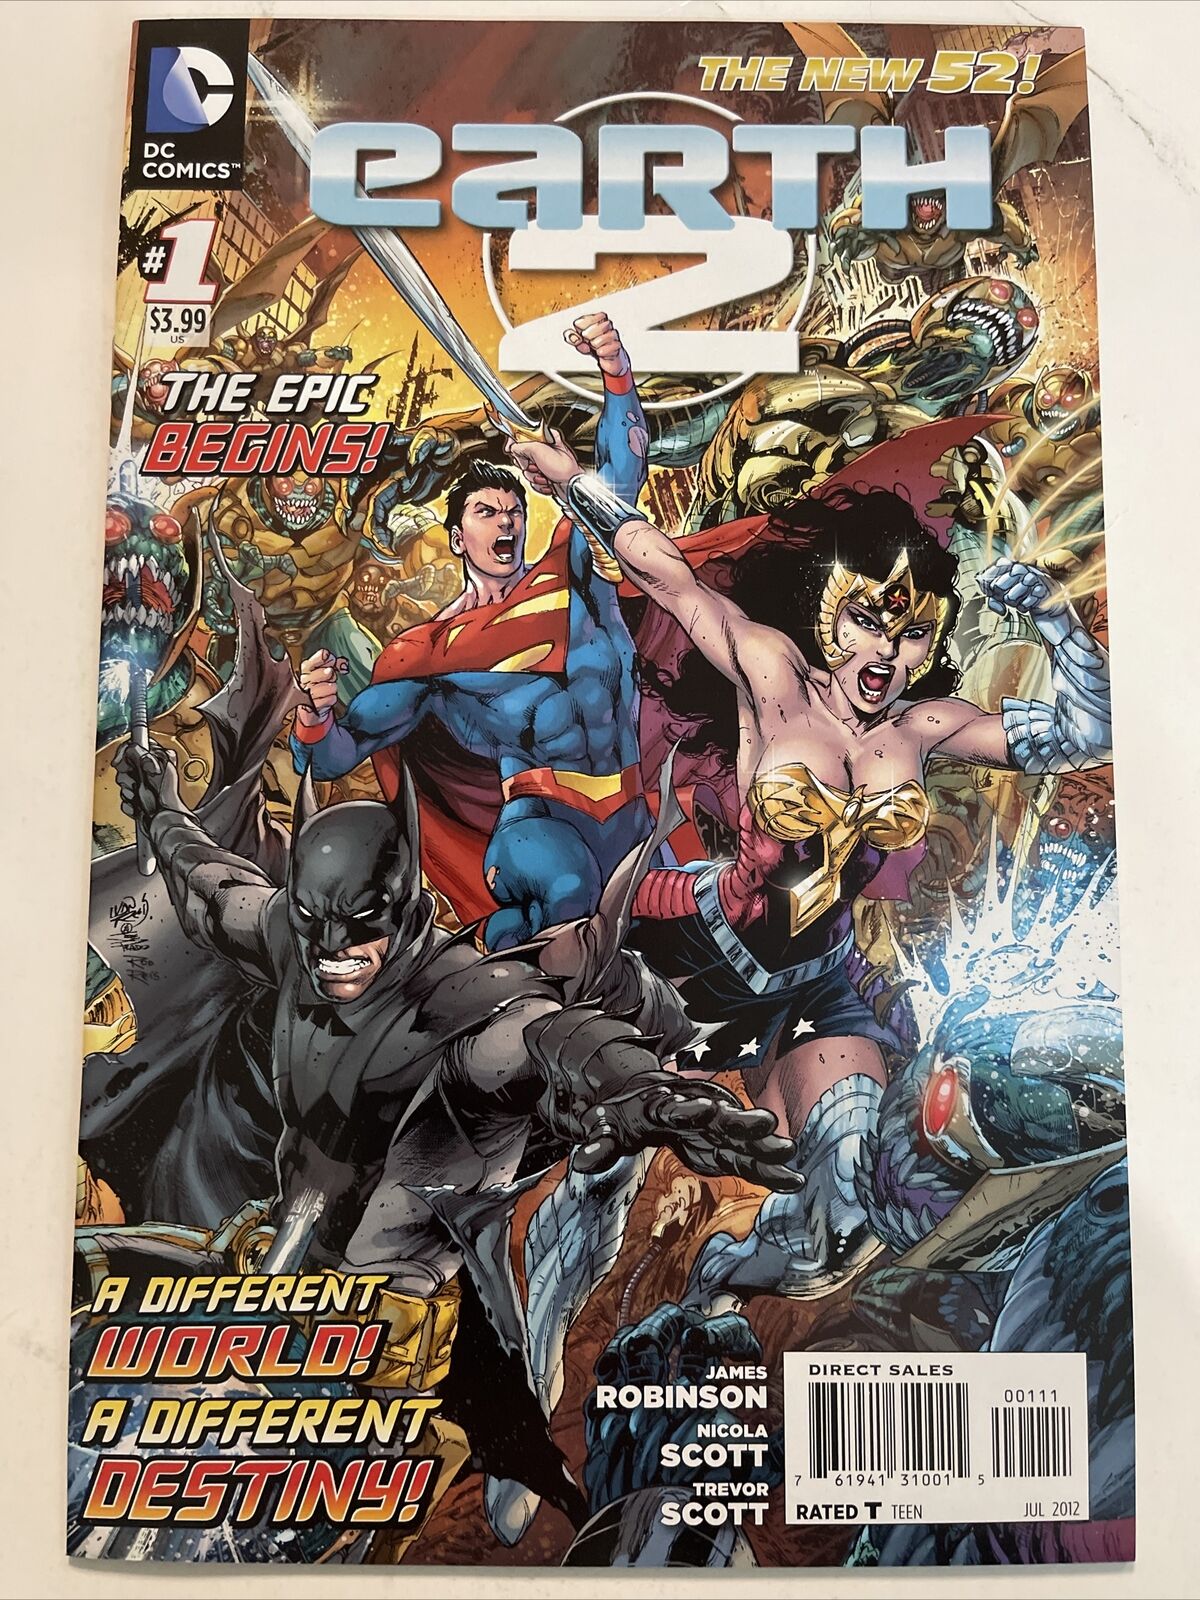 EARTH 2 #1 (2012) DC comics New 52 NM/VF (Alan Scott Re-introduced) Key Issue